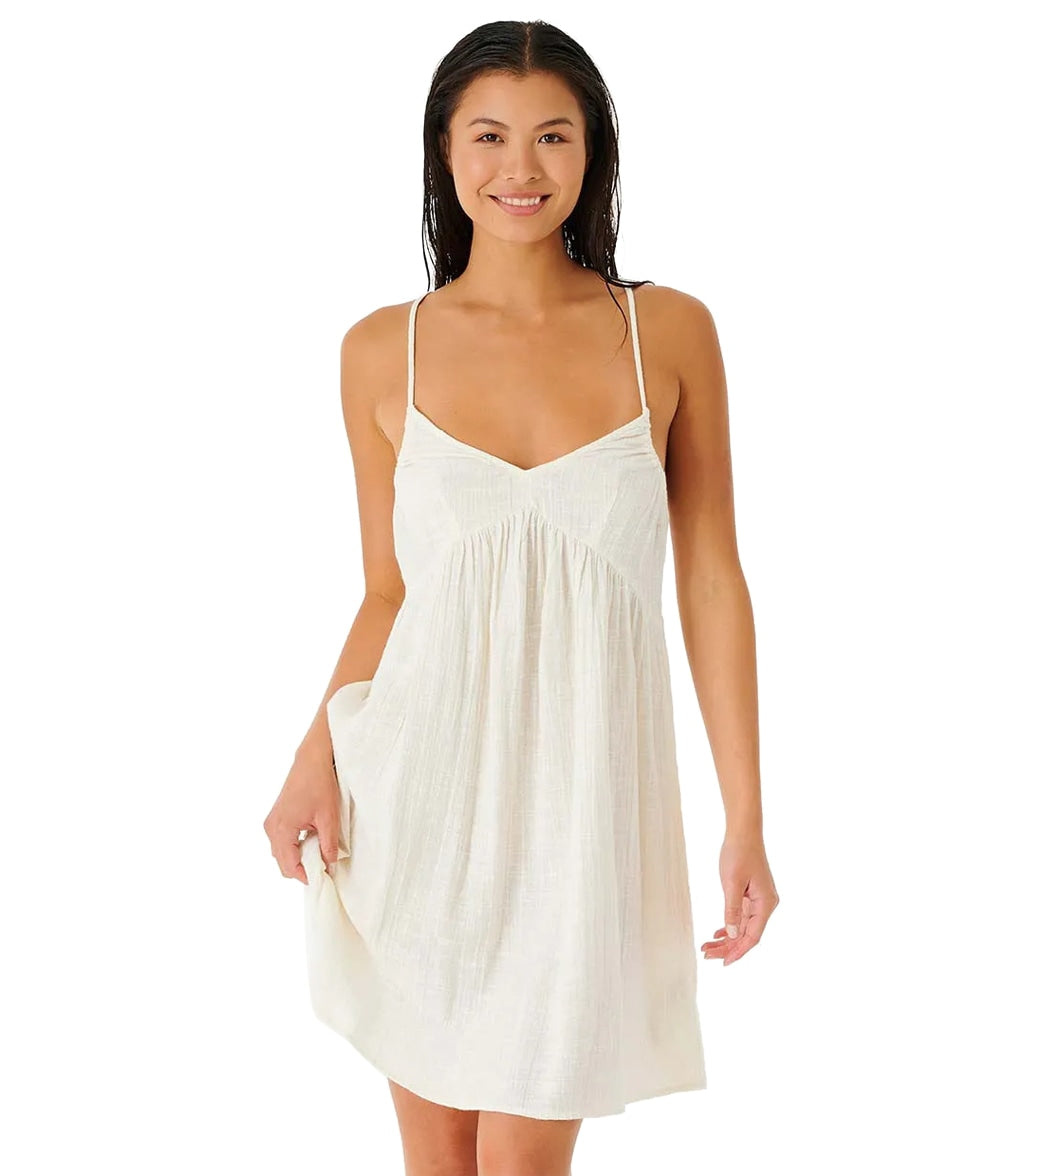 Rip Curl Womens Classic Surf Cover Up Dress